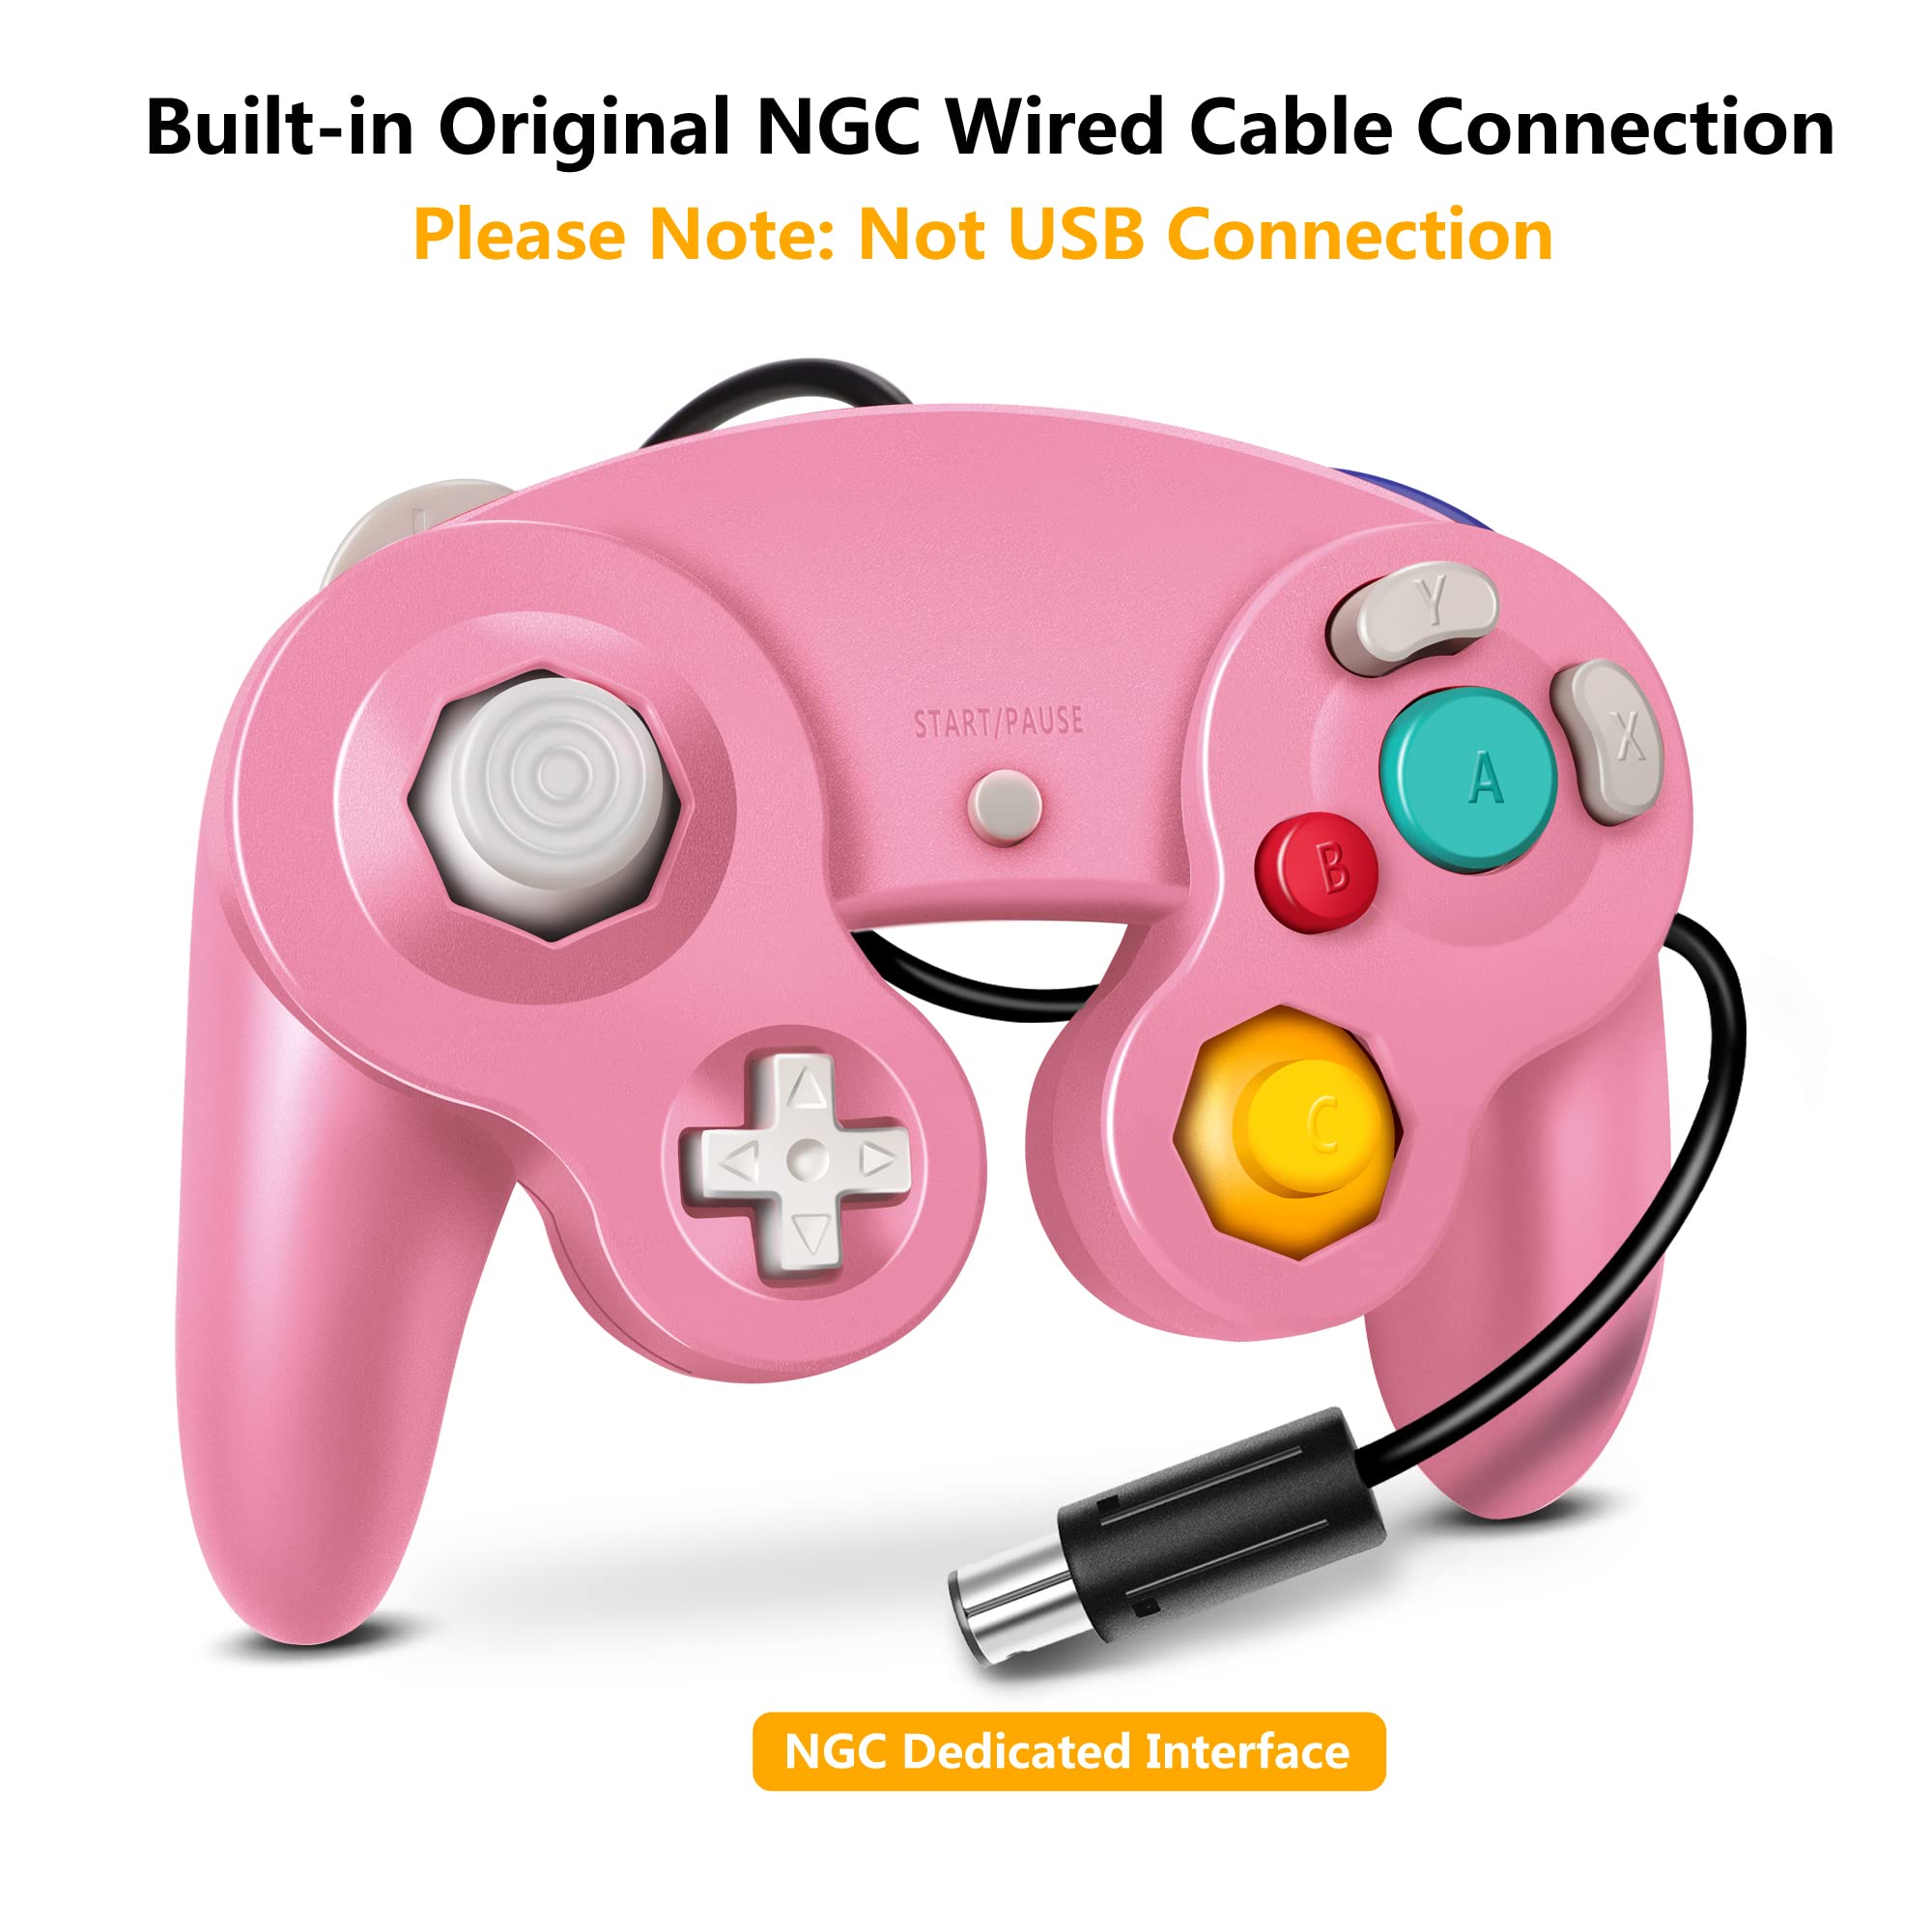 FIOTOK Gamecube Controller, Classic Wired Controller for Wii Nintendo Gamecube (Pink)